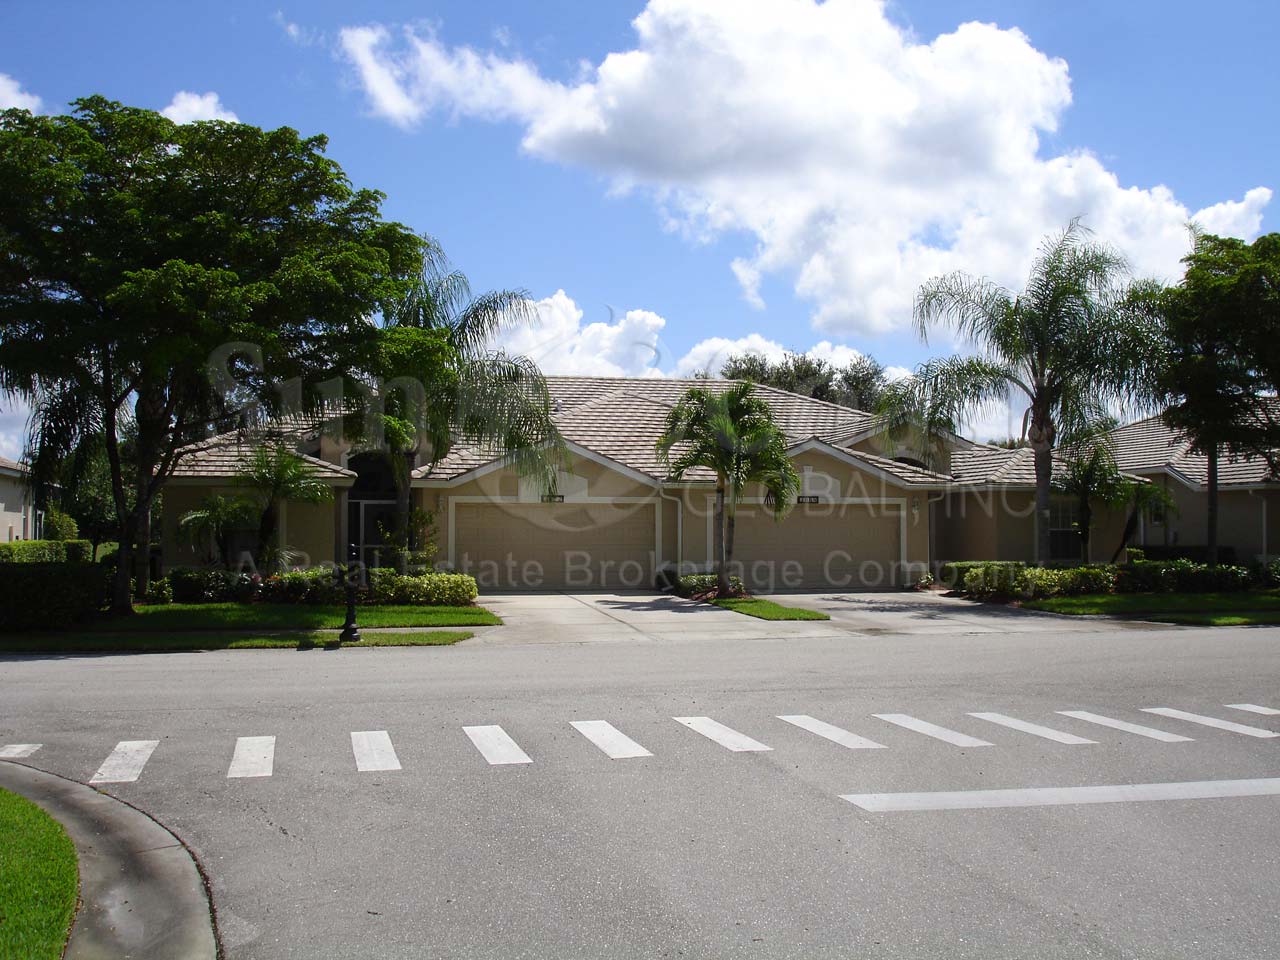 Buttonwood Way consists of 2 family villas with 2 car garages on the water or golf course